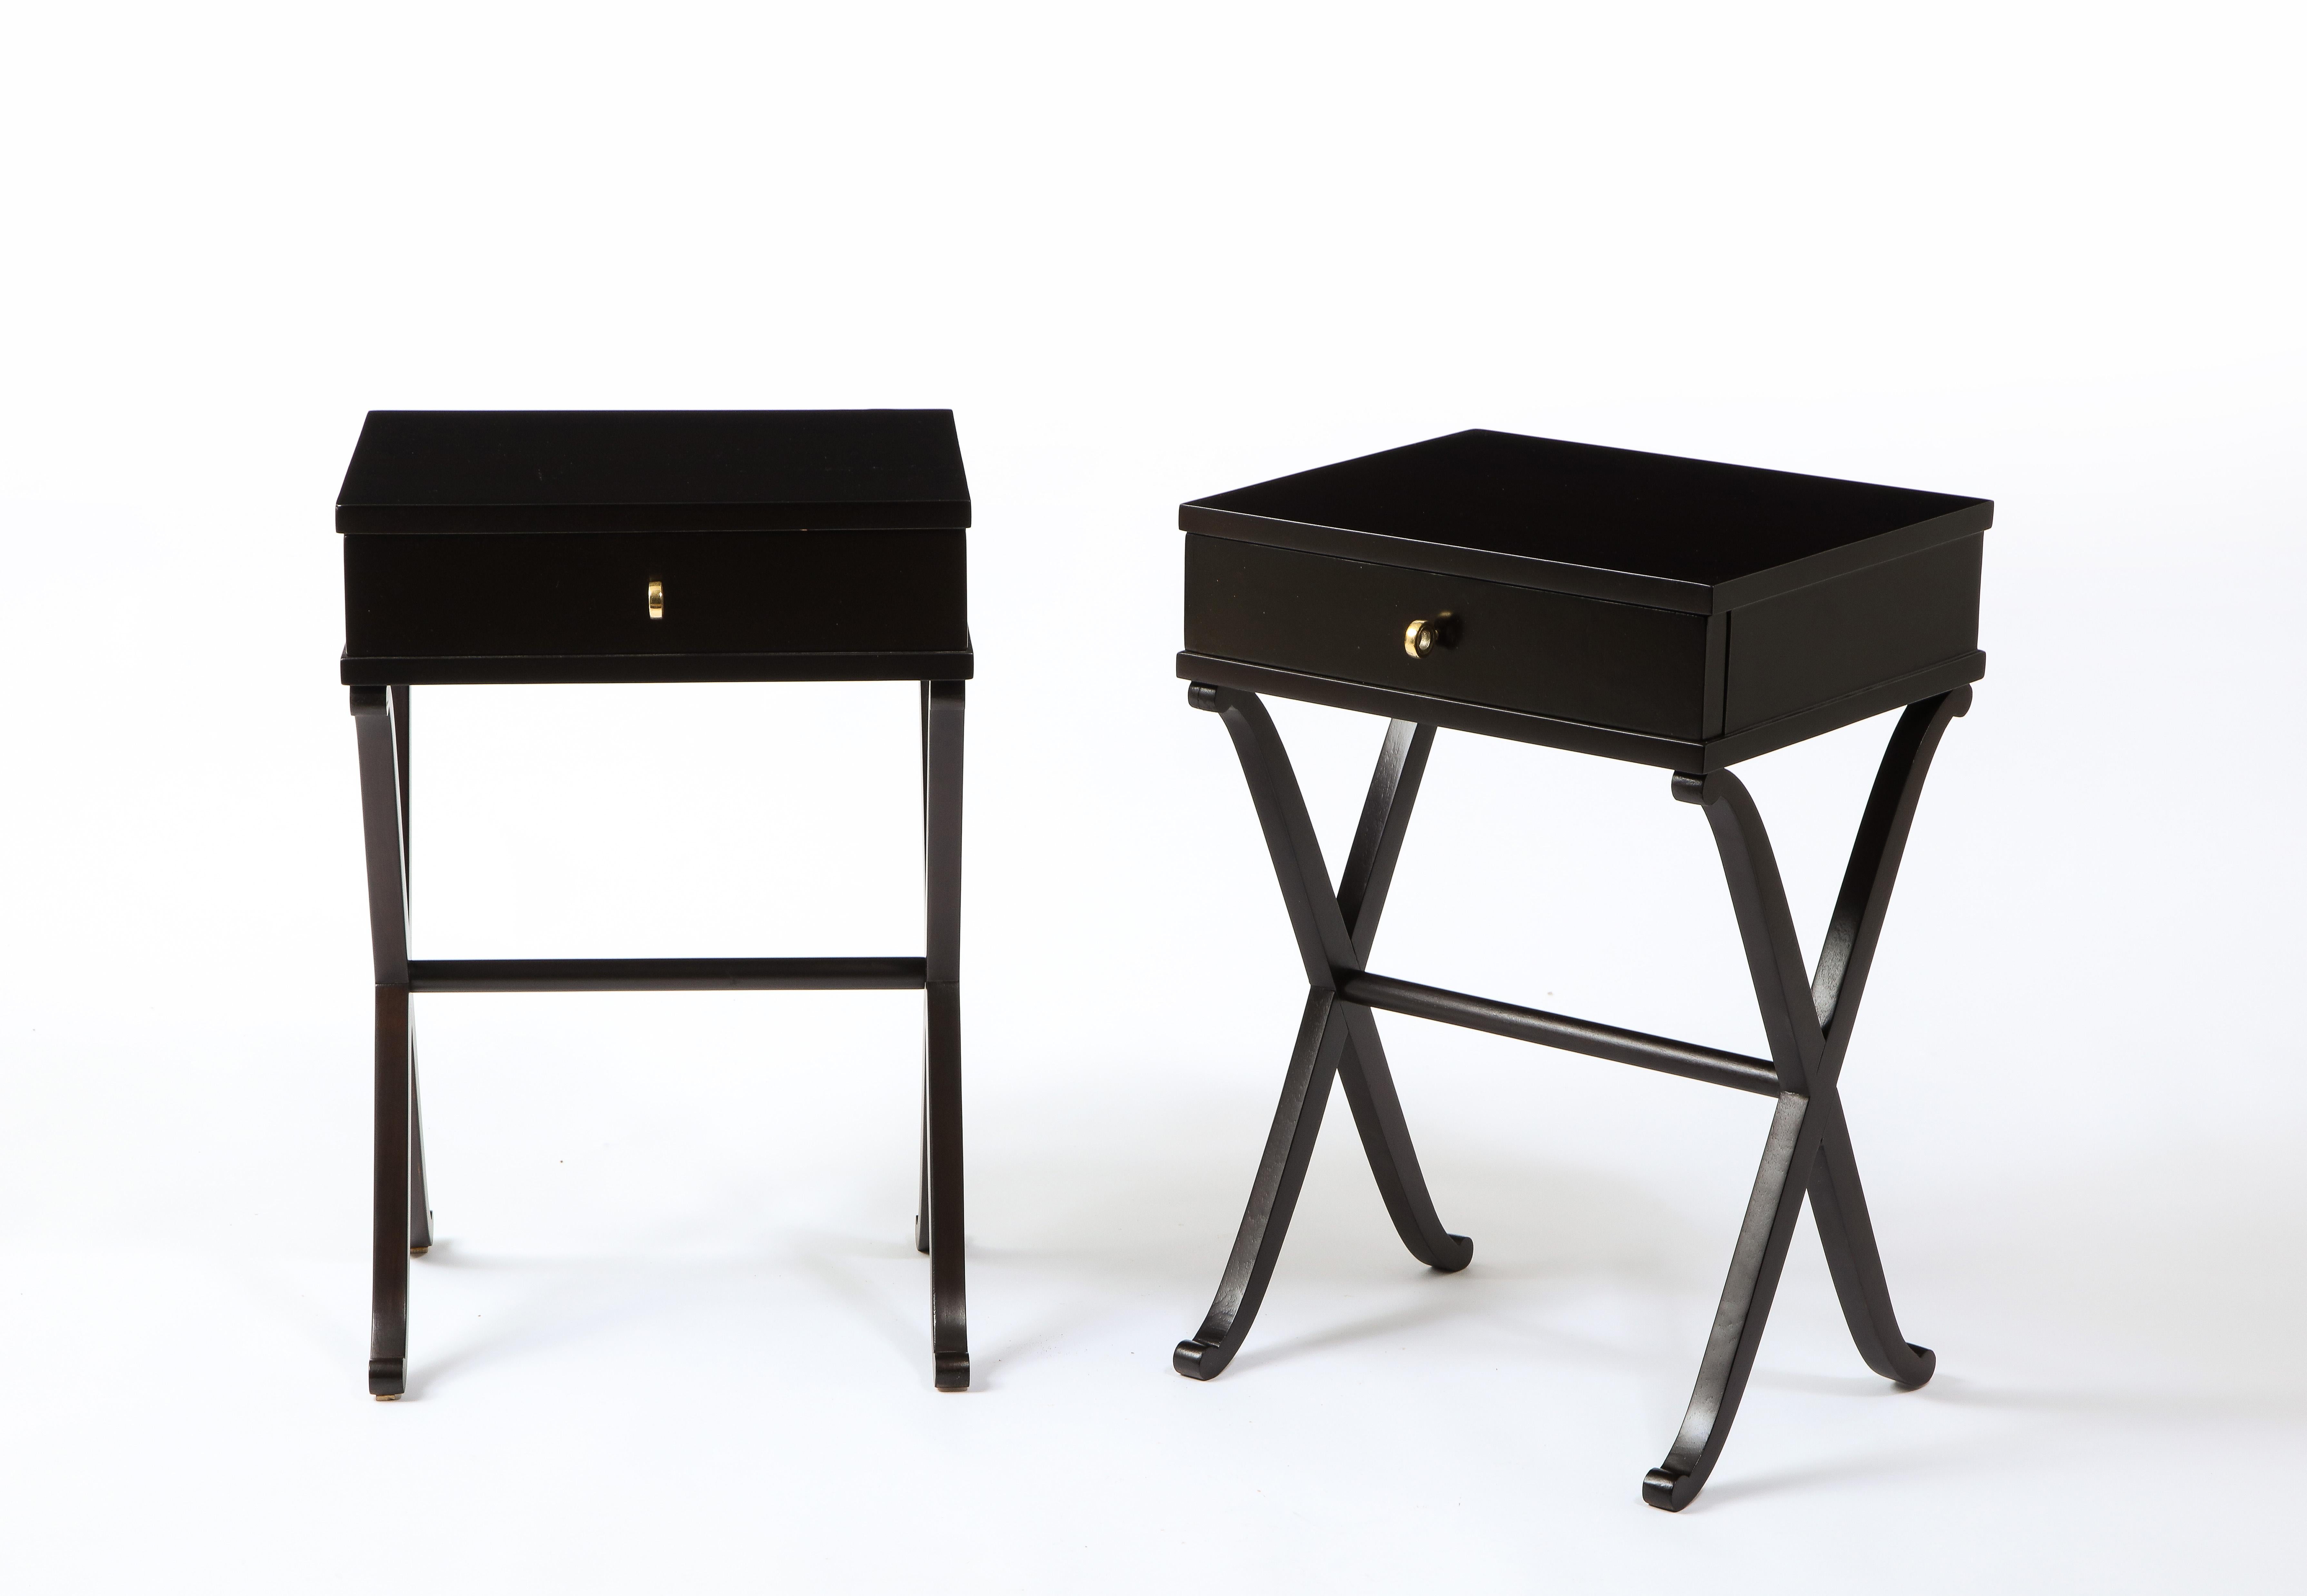 Elegant pair of end tables with x legs and one drawer. They make several nods to the work of André Arbus.